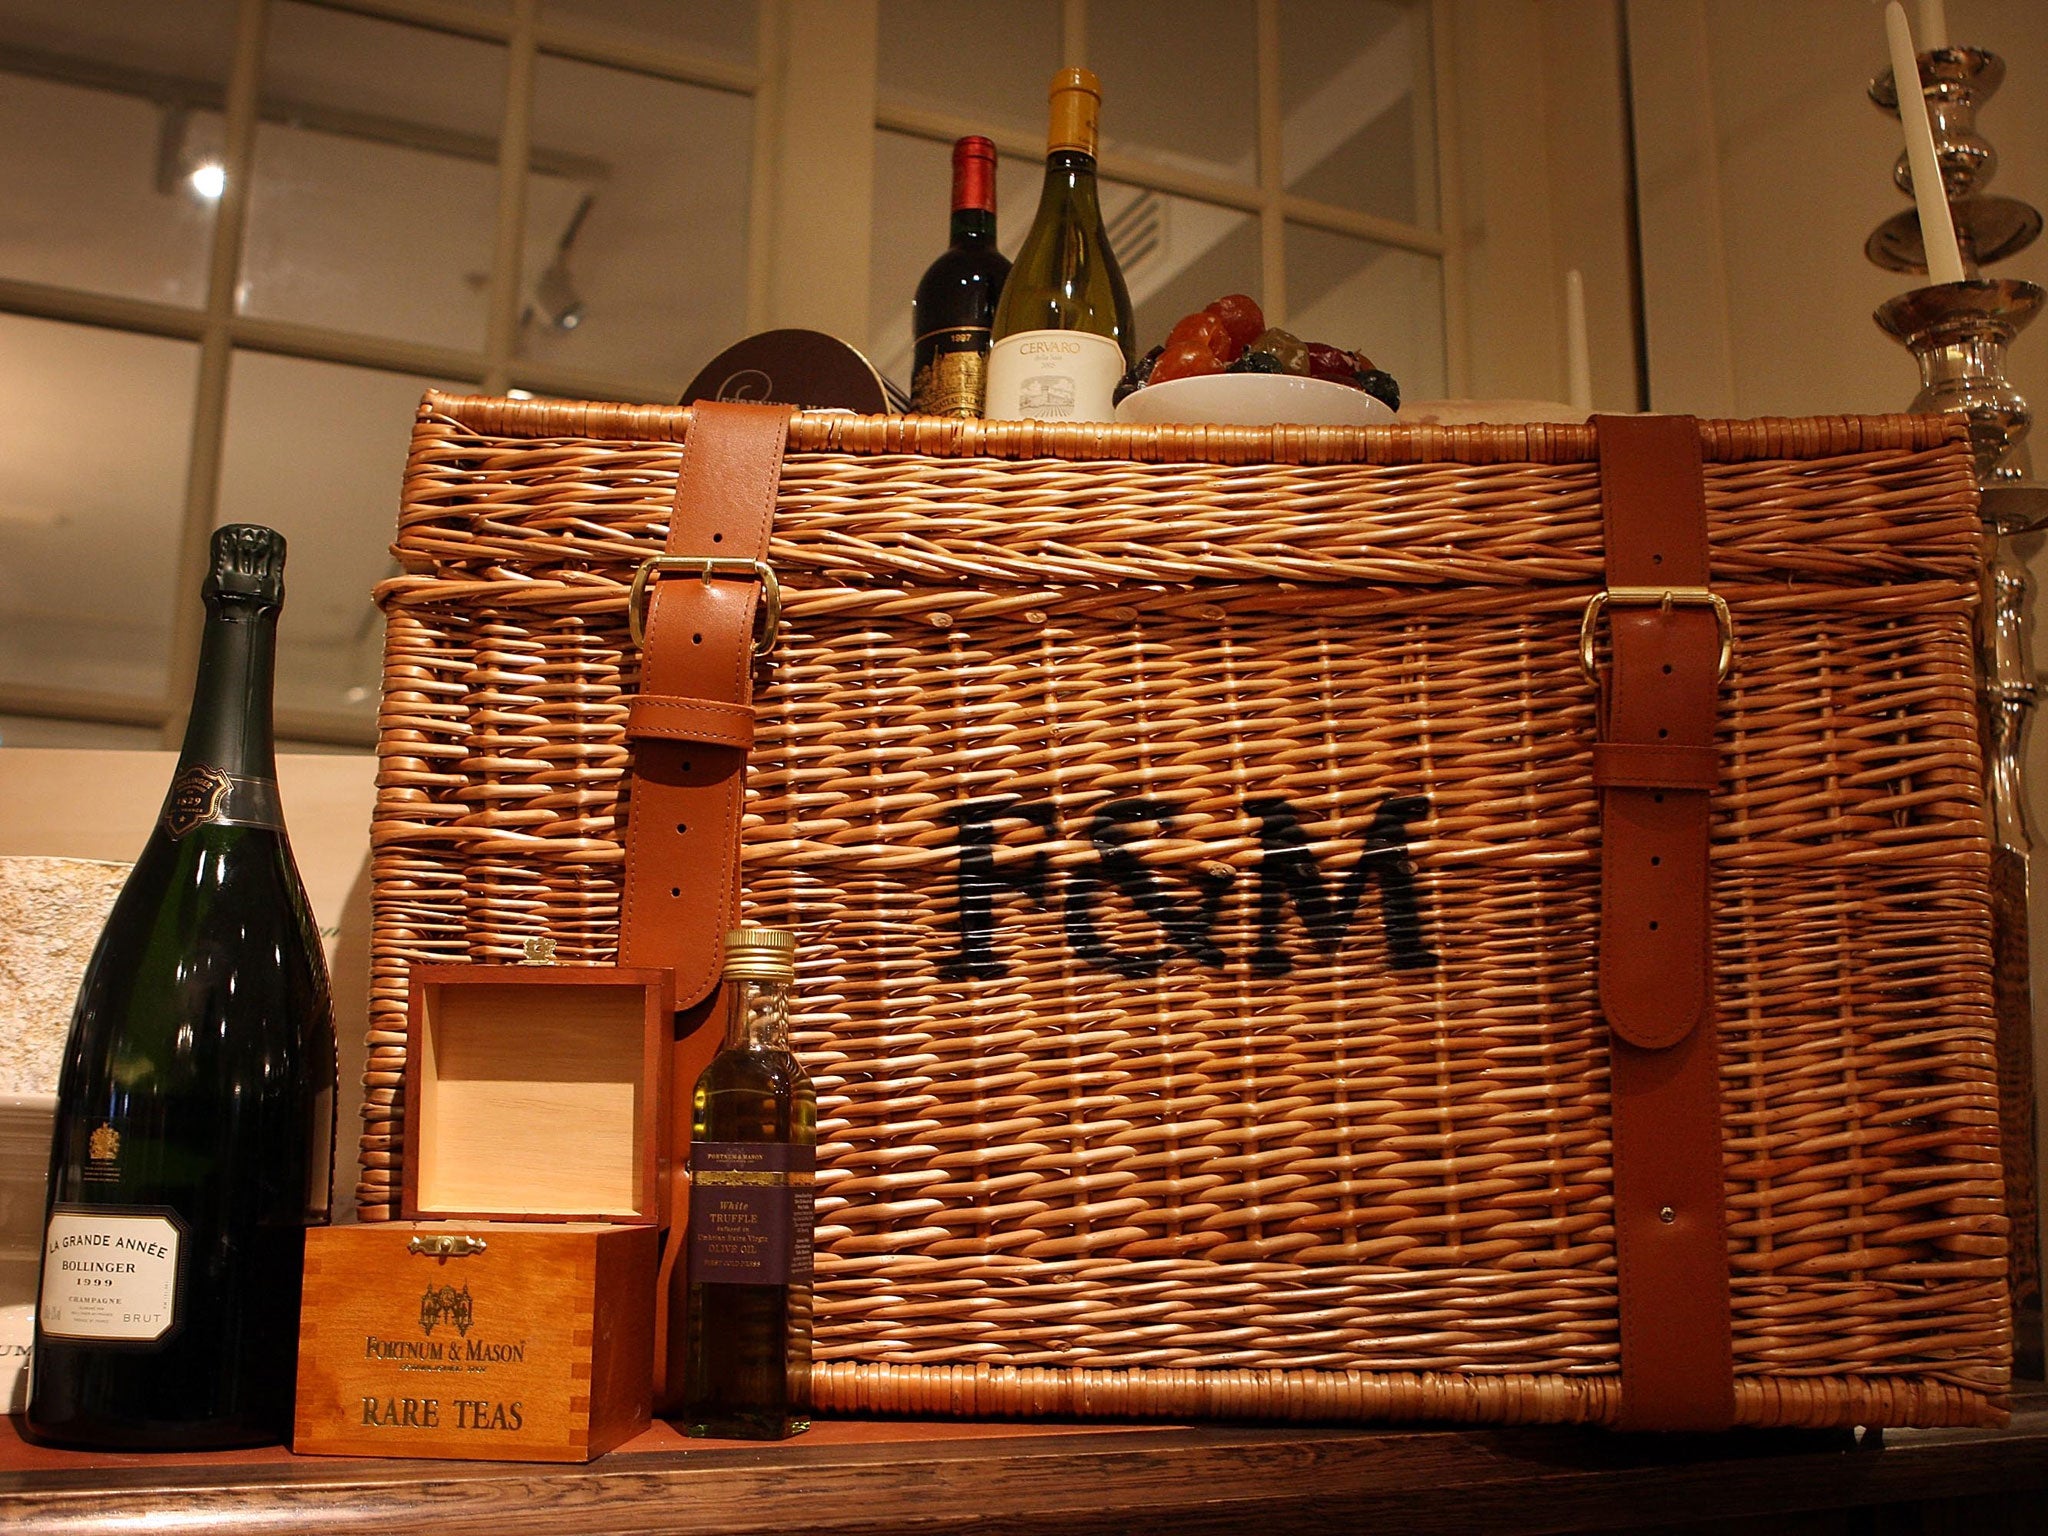 Fortnum & Mason's hamper sales surged by 15 per cent in the run-up to Christmas